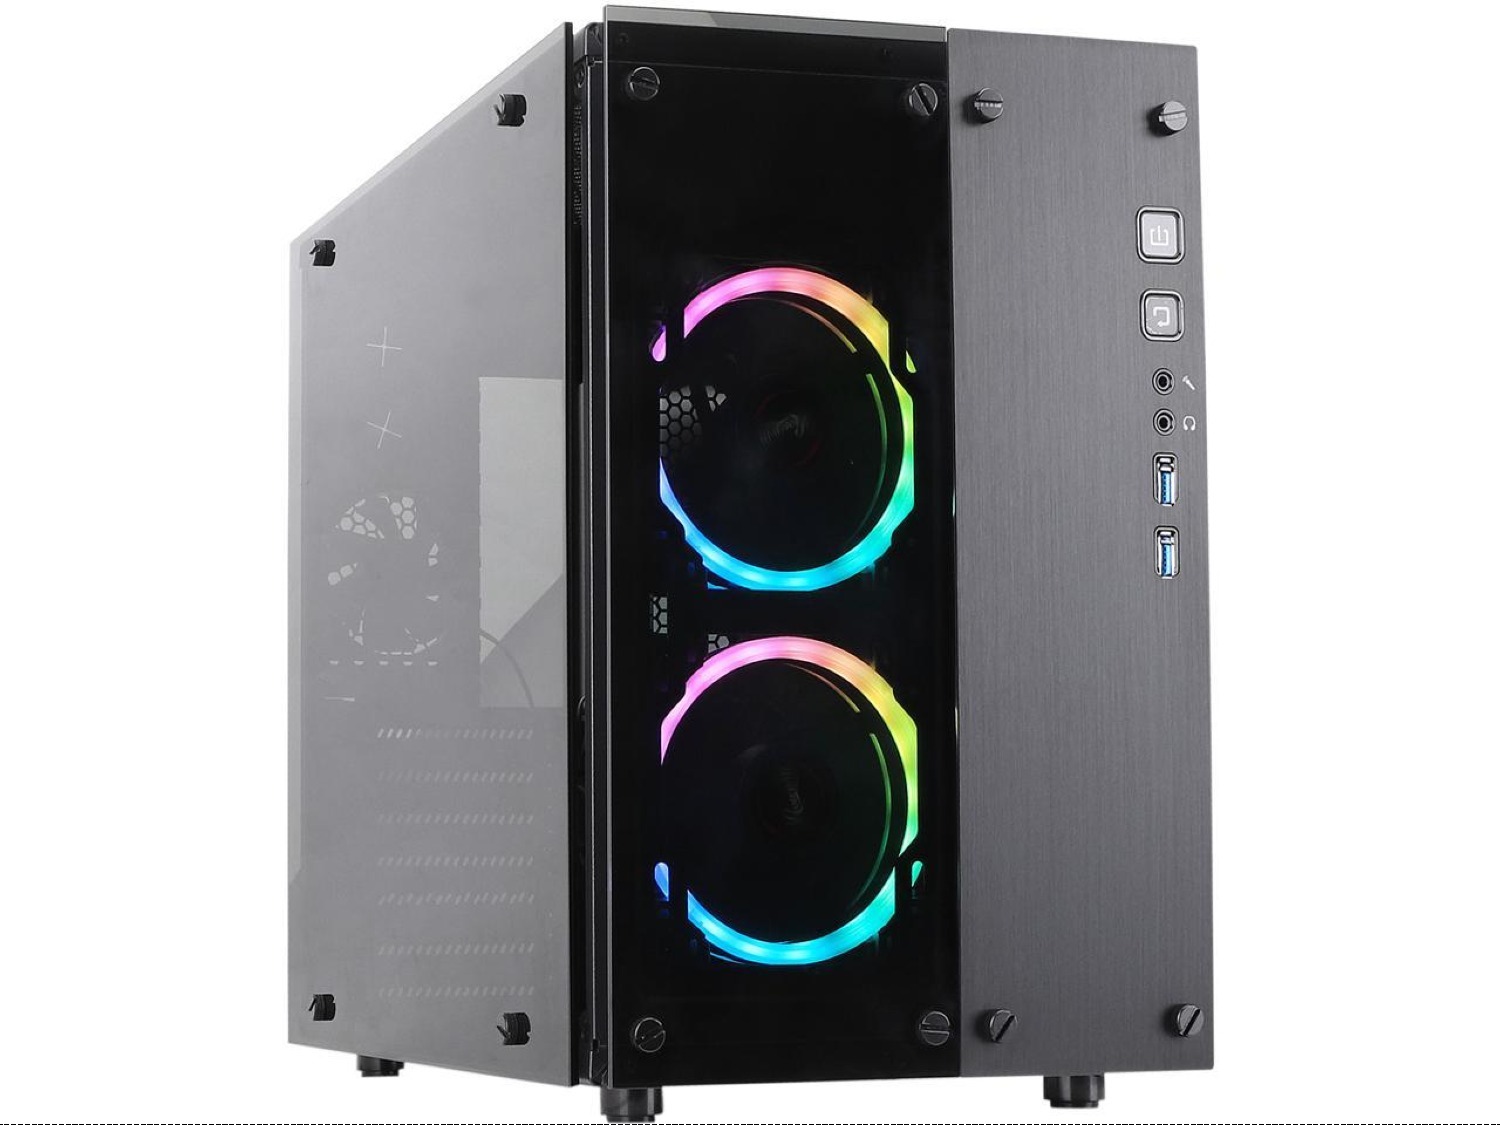 Rosewill Cullinan PX RGB-ST ATX Mid-Tower Computer Case $80 + Free Shipping